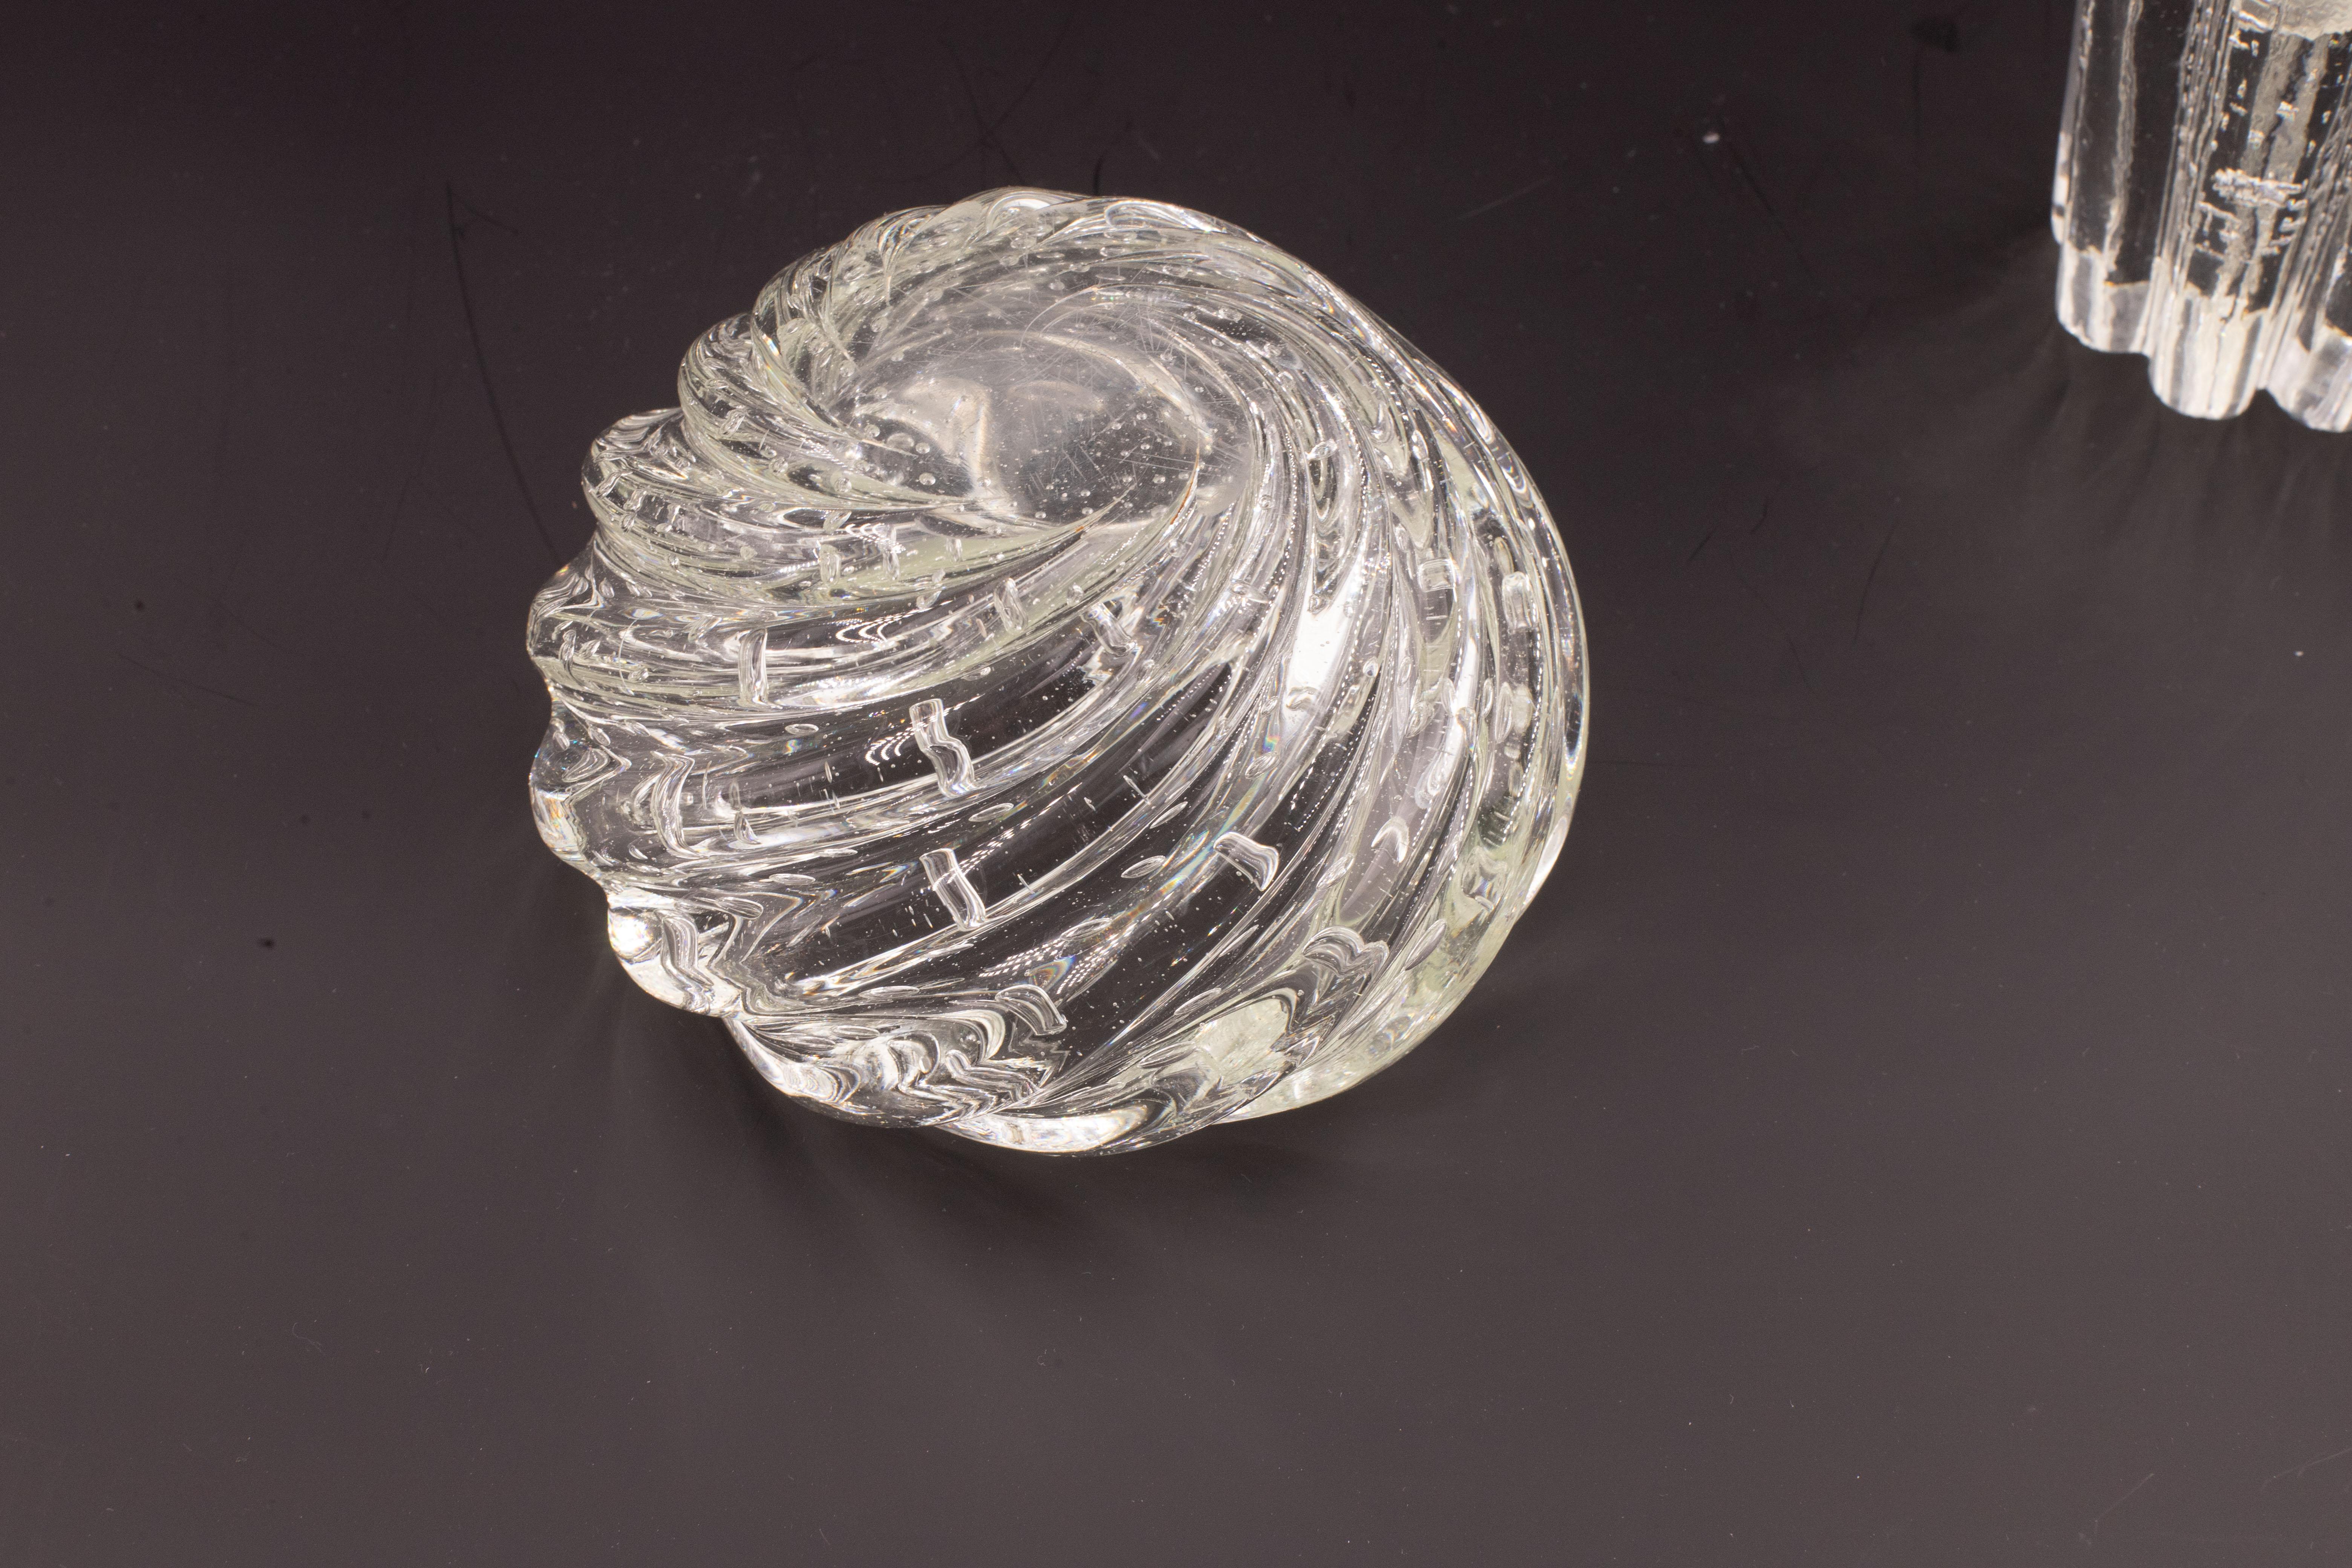 Set of 2 Bubbles Glass Vase by Barovier e Toso, 1950s For Sale 2